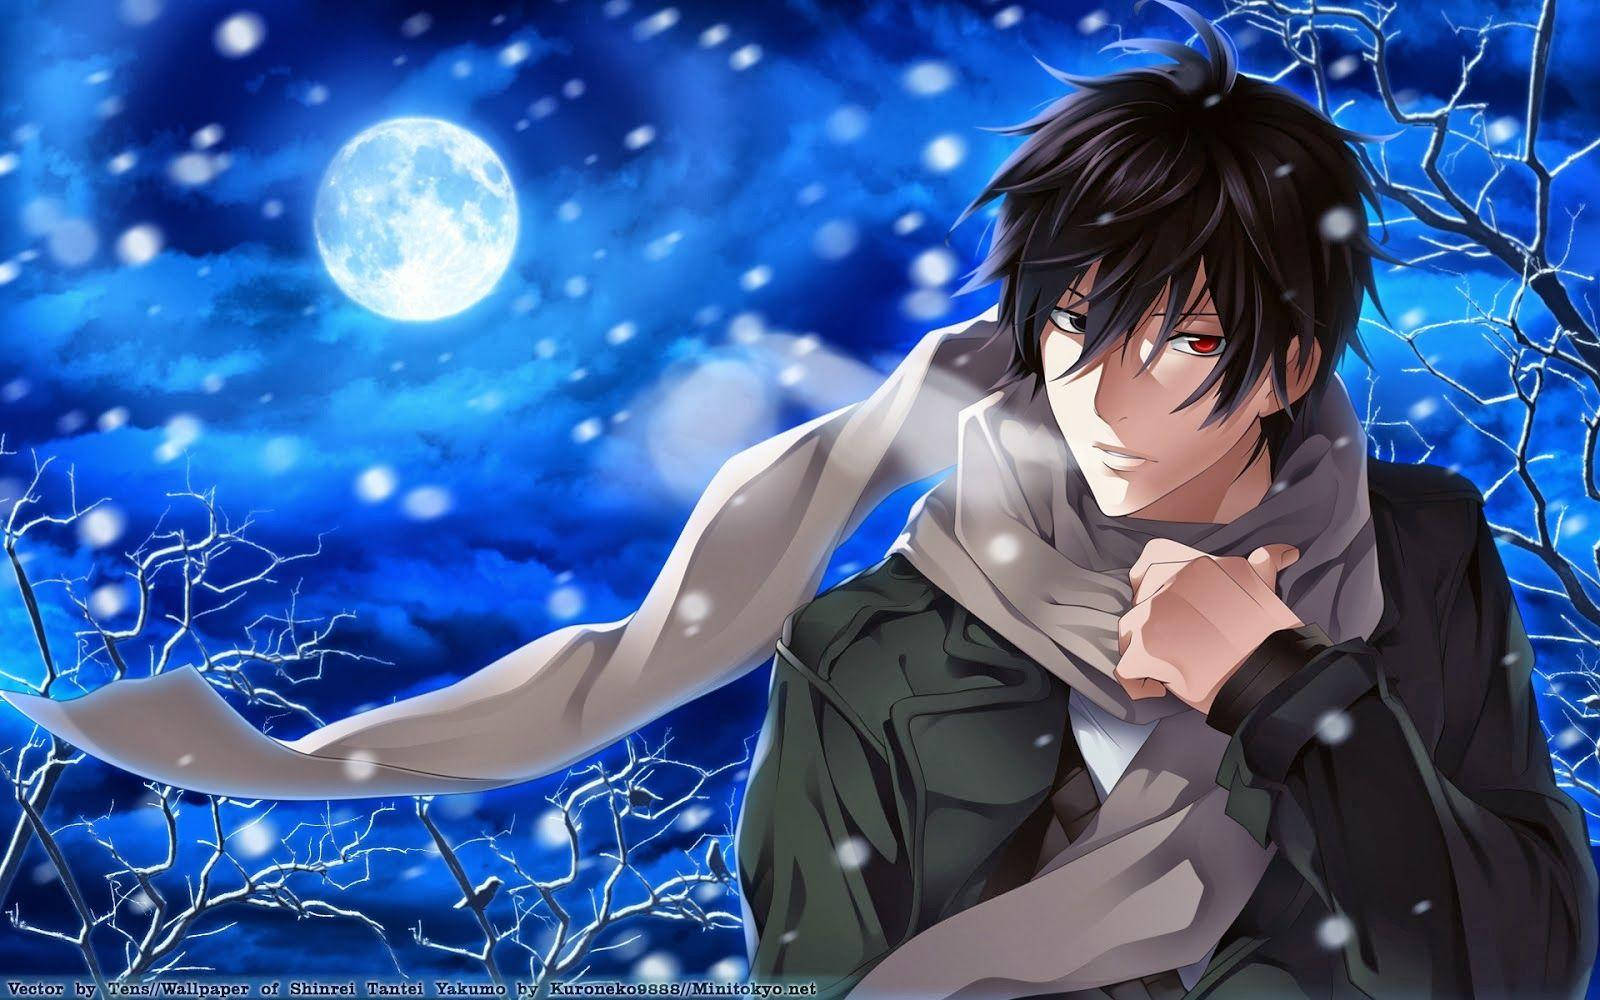 Anime Blue Boy And The Bright Moon Wallpaper